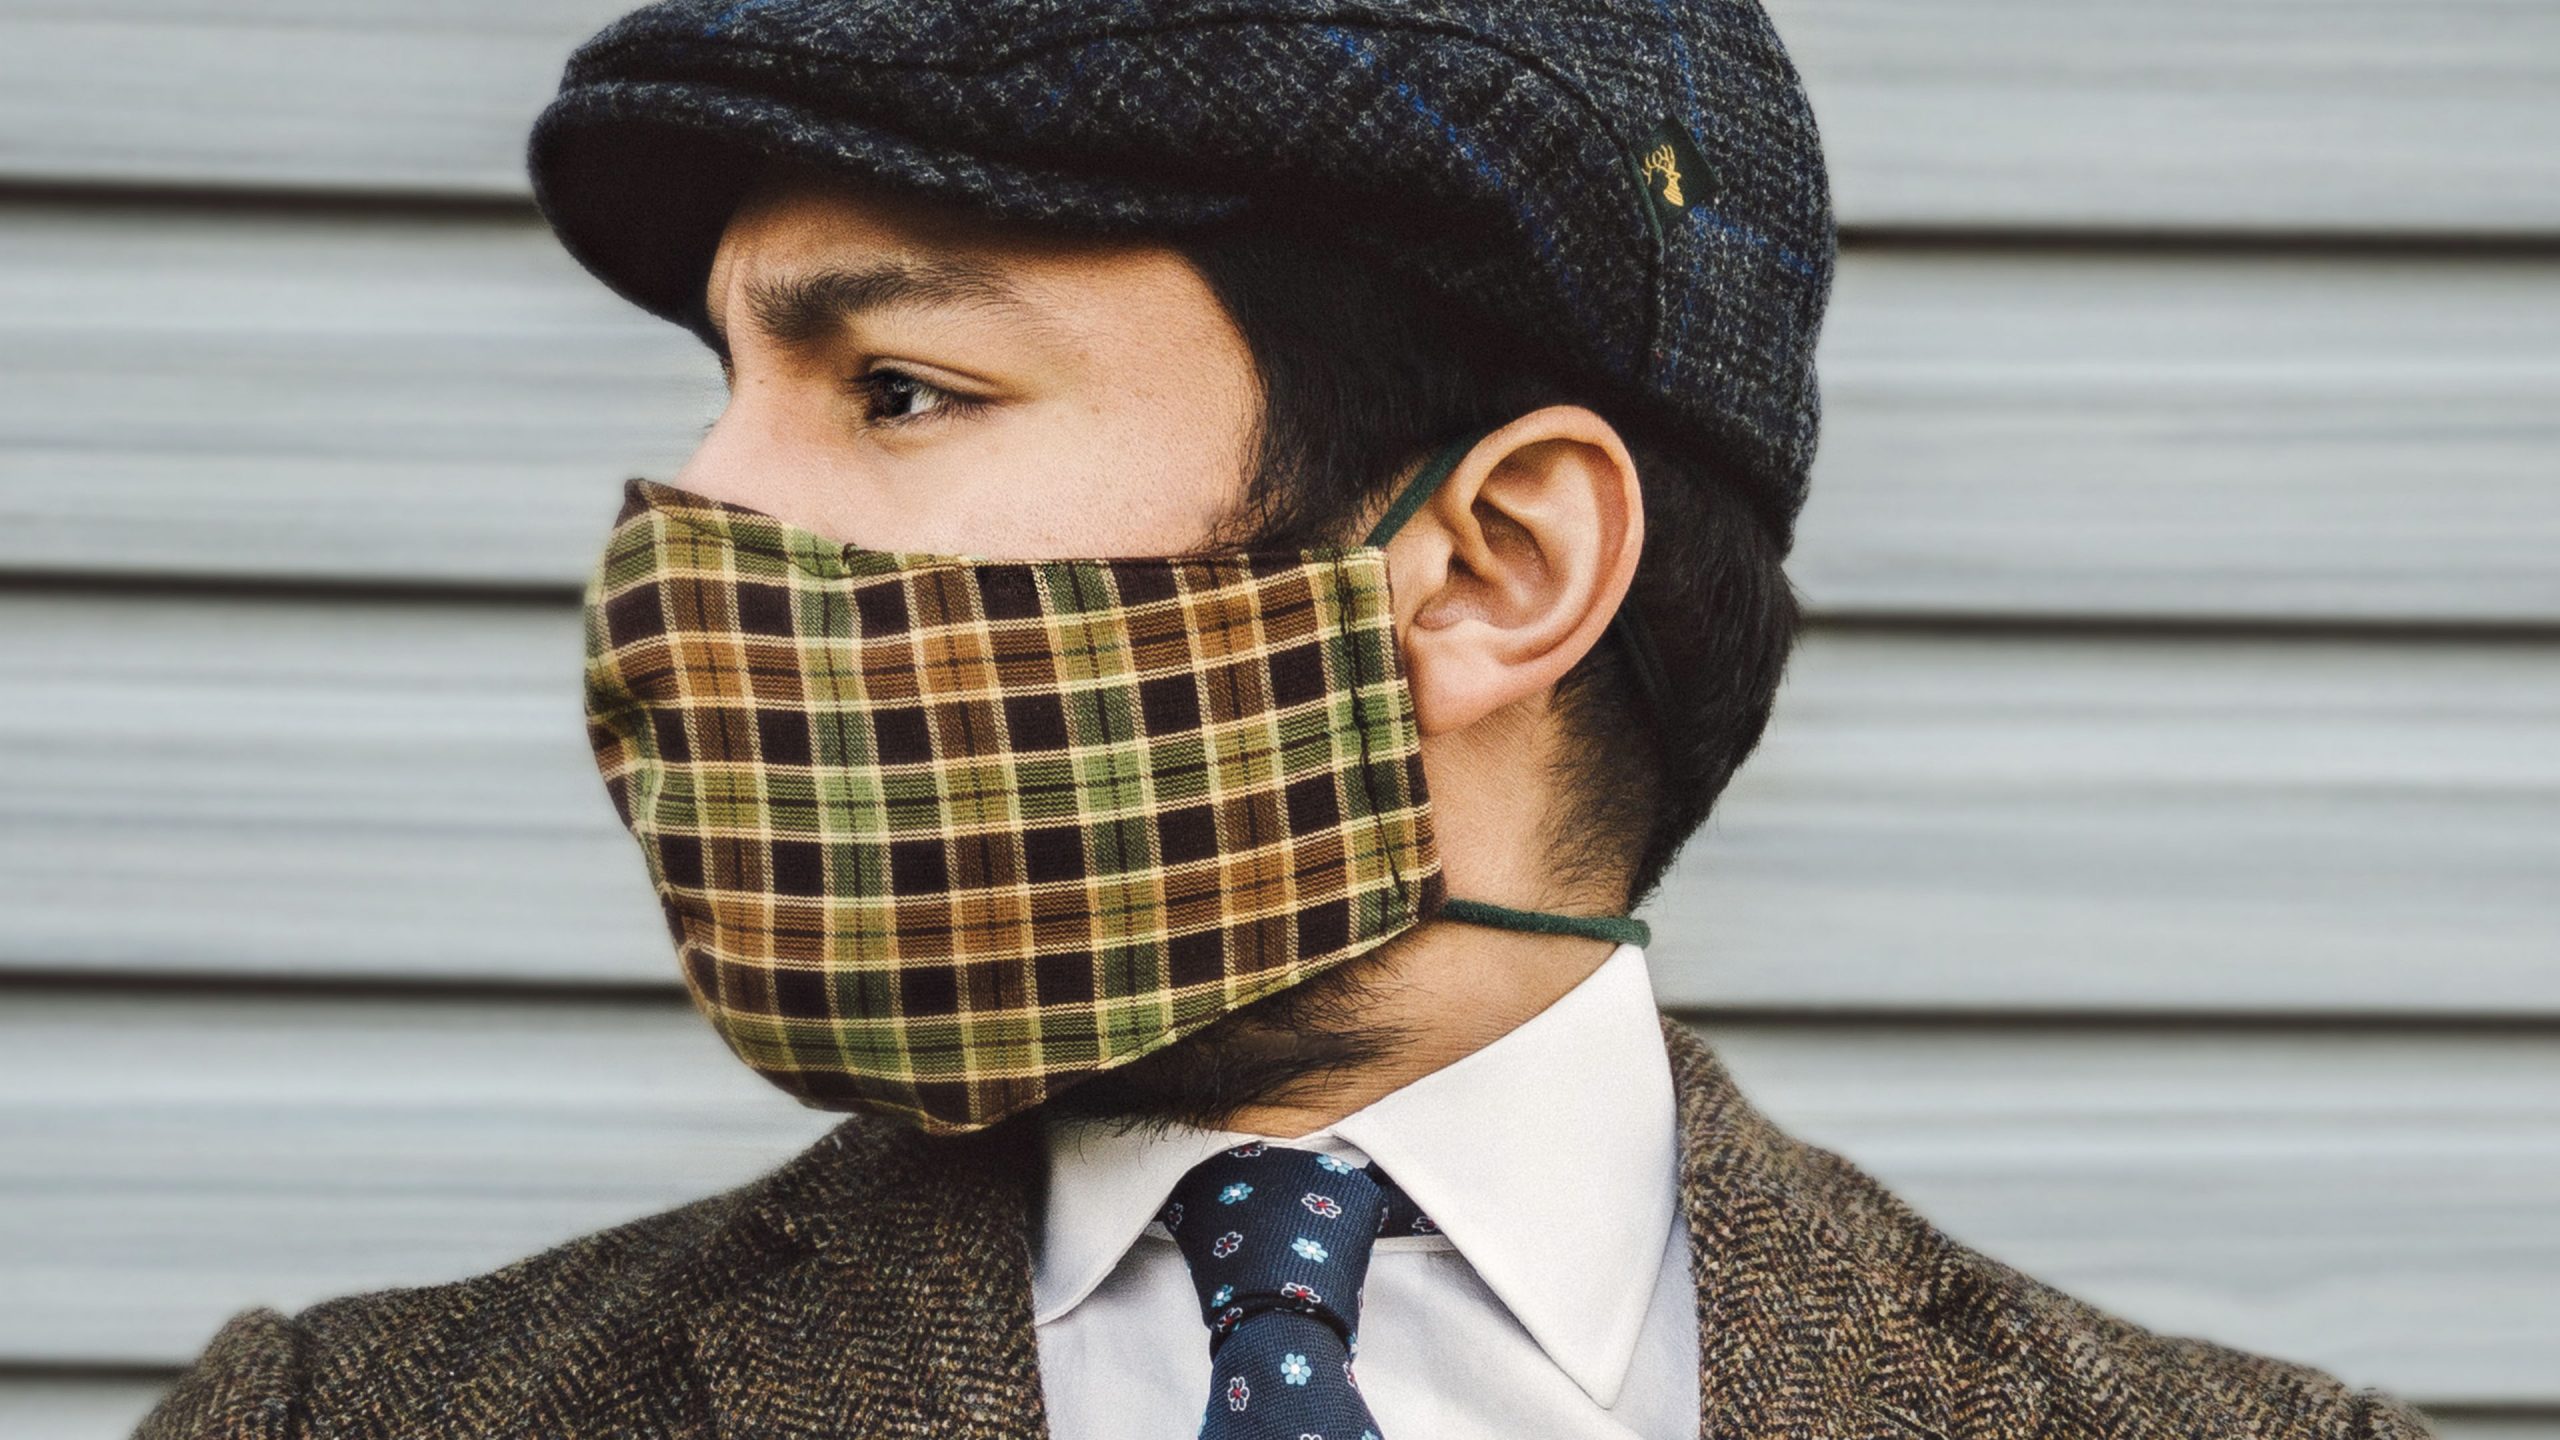 HOW TO STAY STYLISH DURING THE PANDEMIC: 5 TOP TIPS